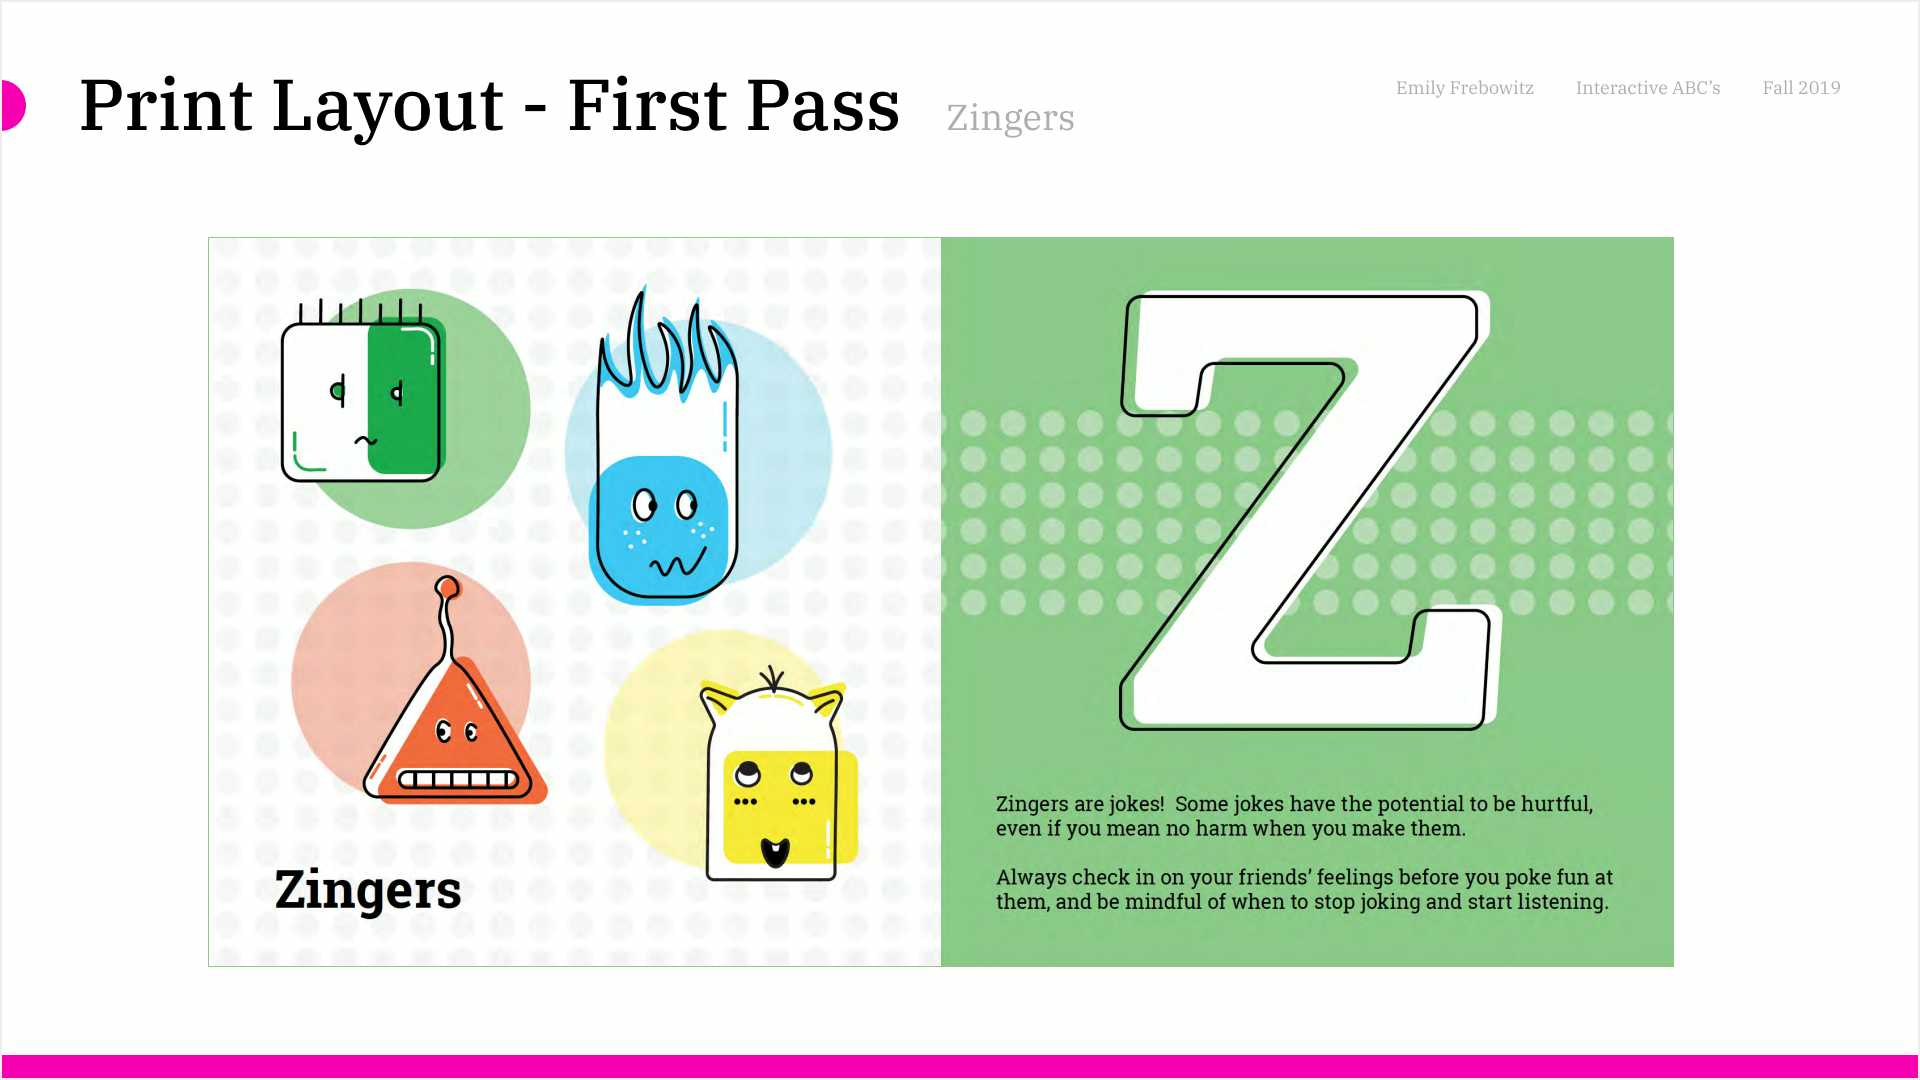 Emily Frebowitz’s Process Deck Page Number 55